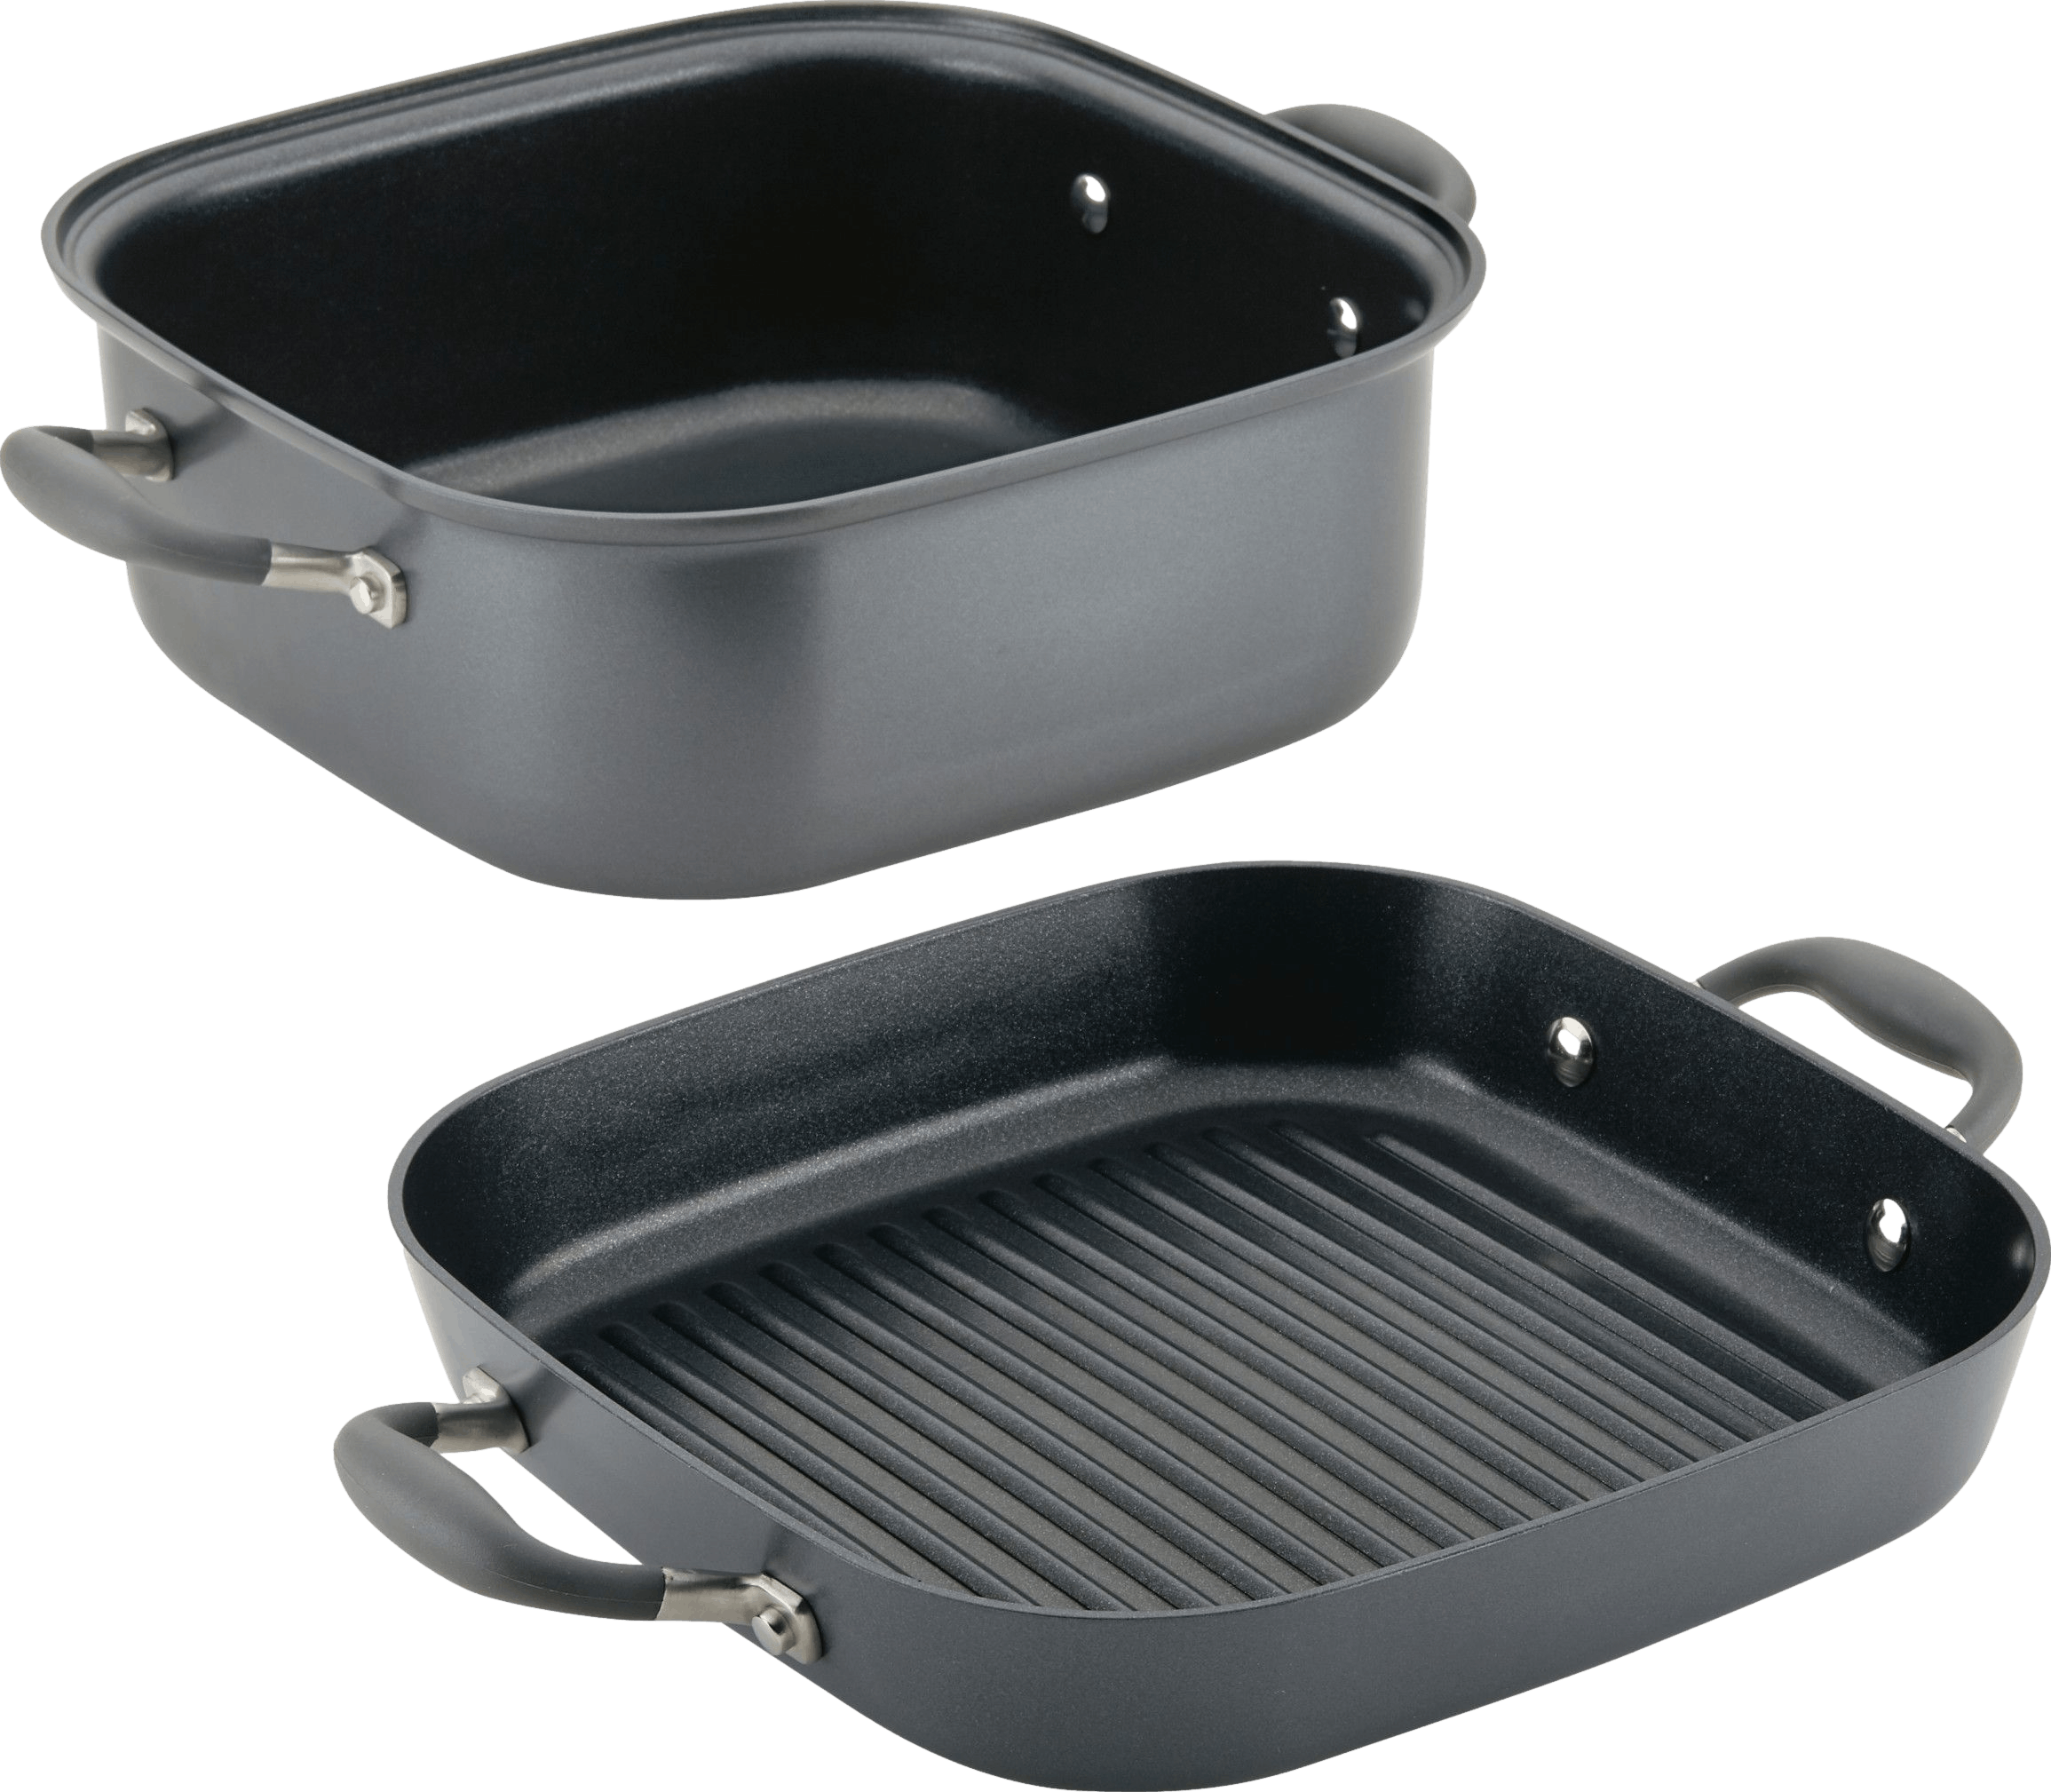 Anolon Advanced Hard Anodized Nonstick Roaster with Rack - Moonstone